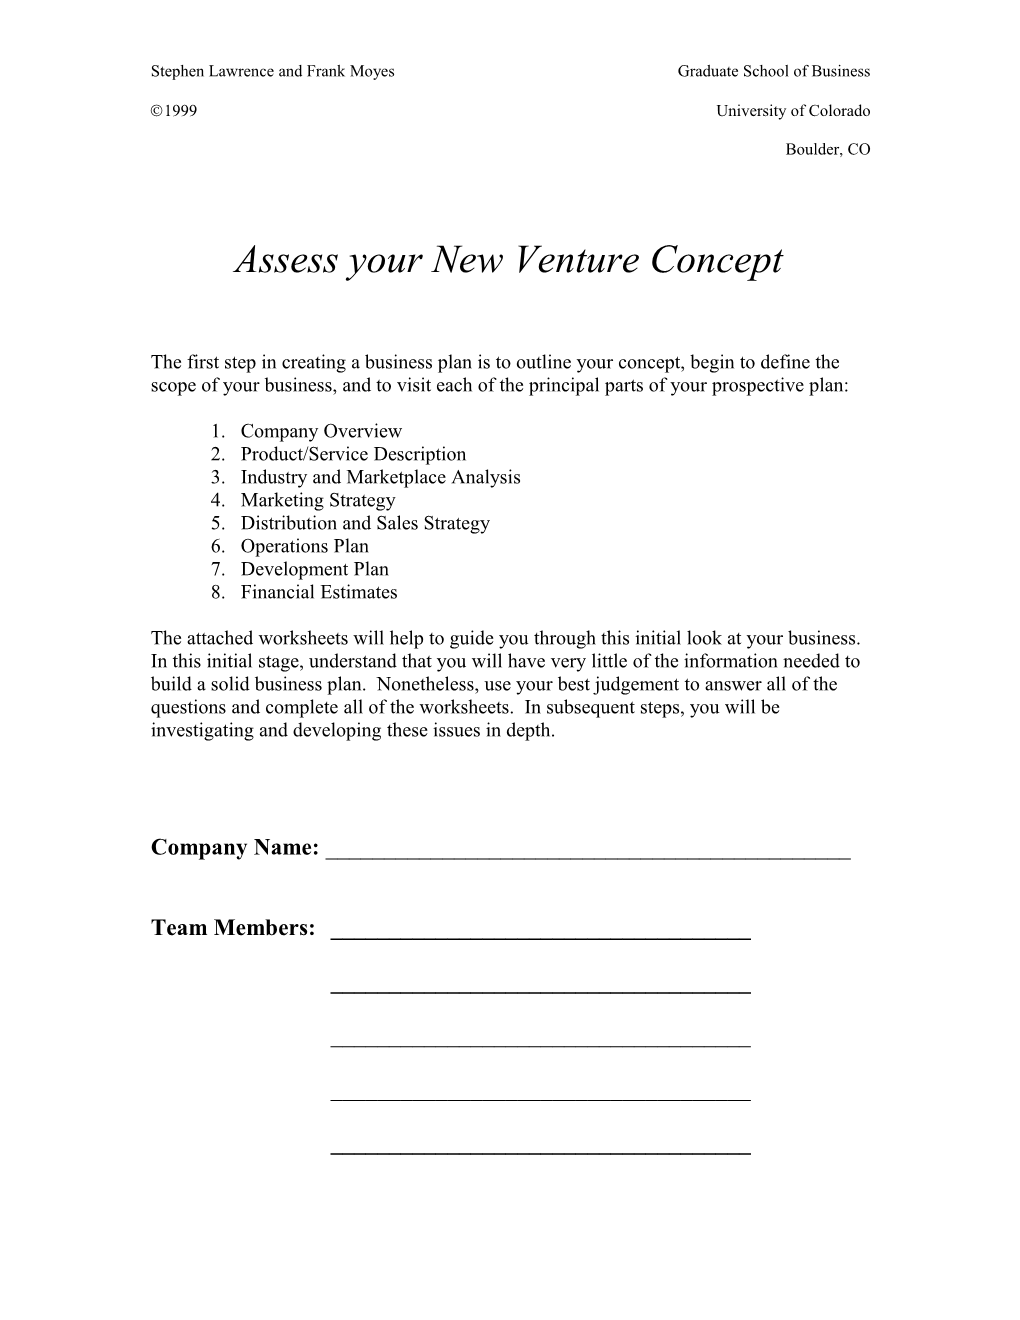 Assess Your New Venture Conceptpage 1 of 10